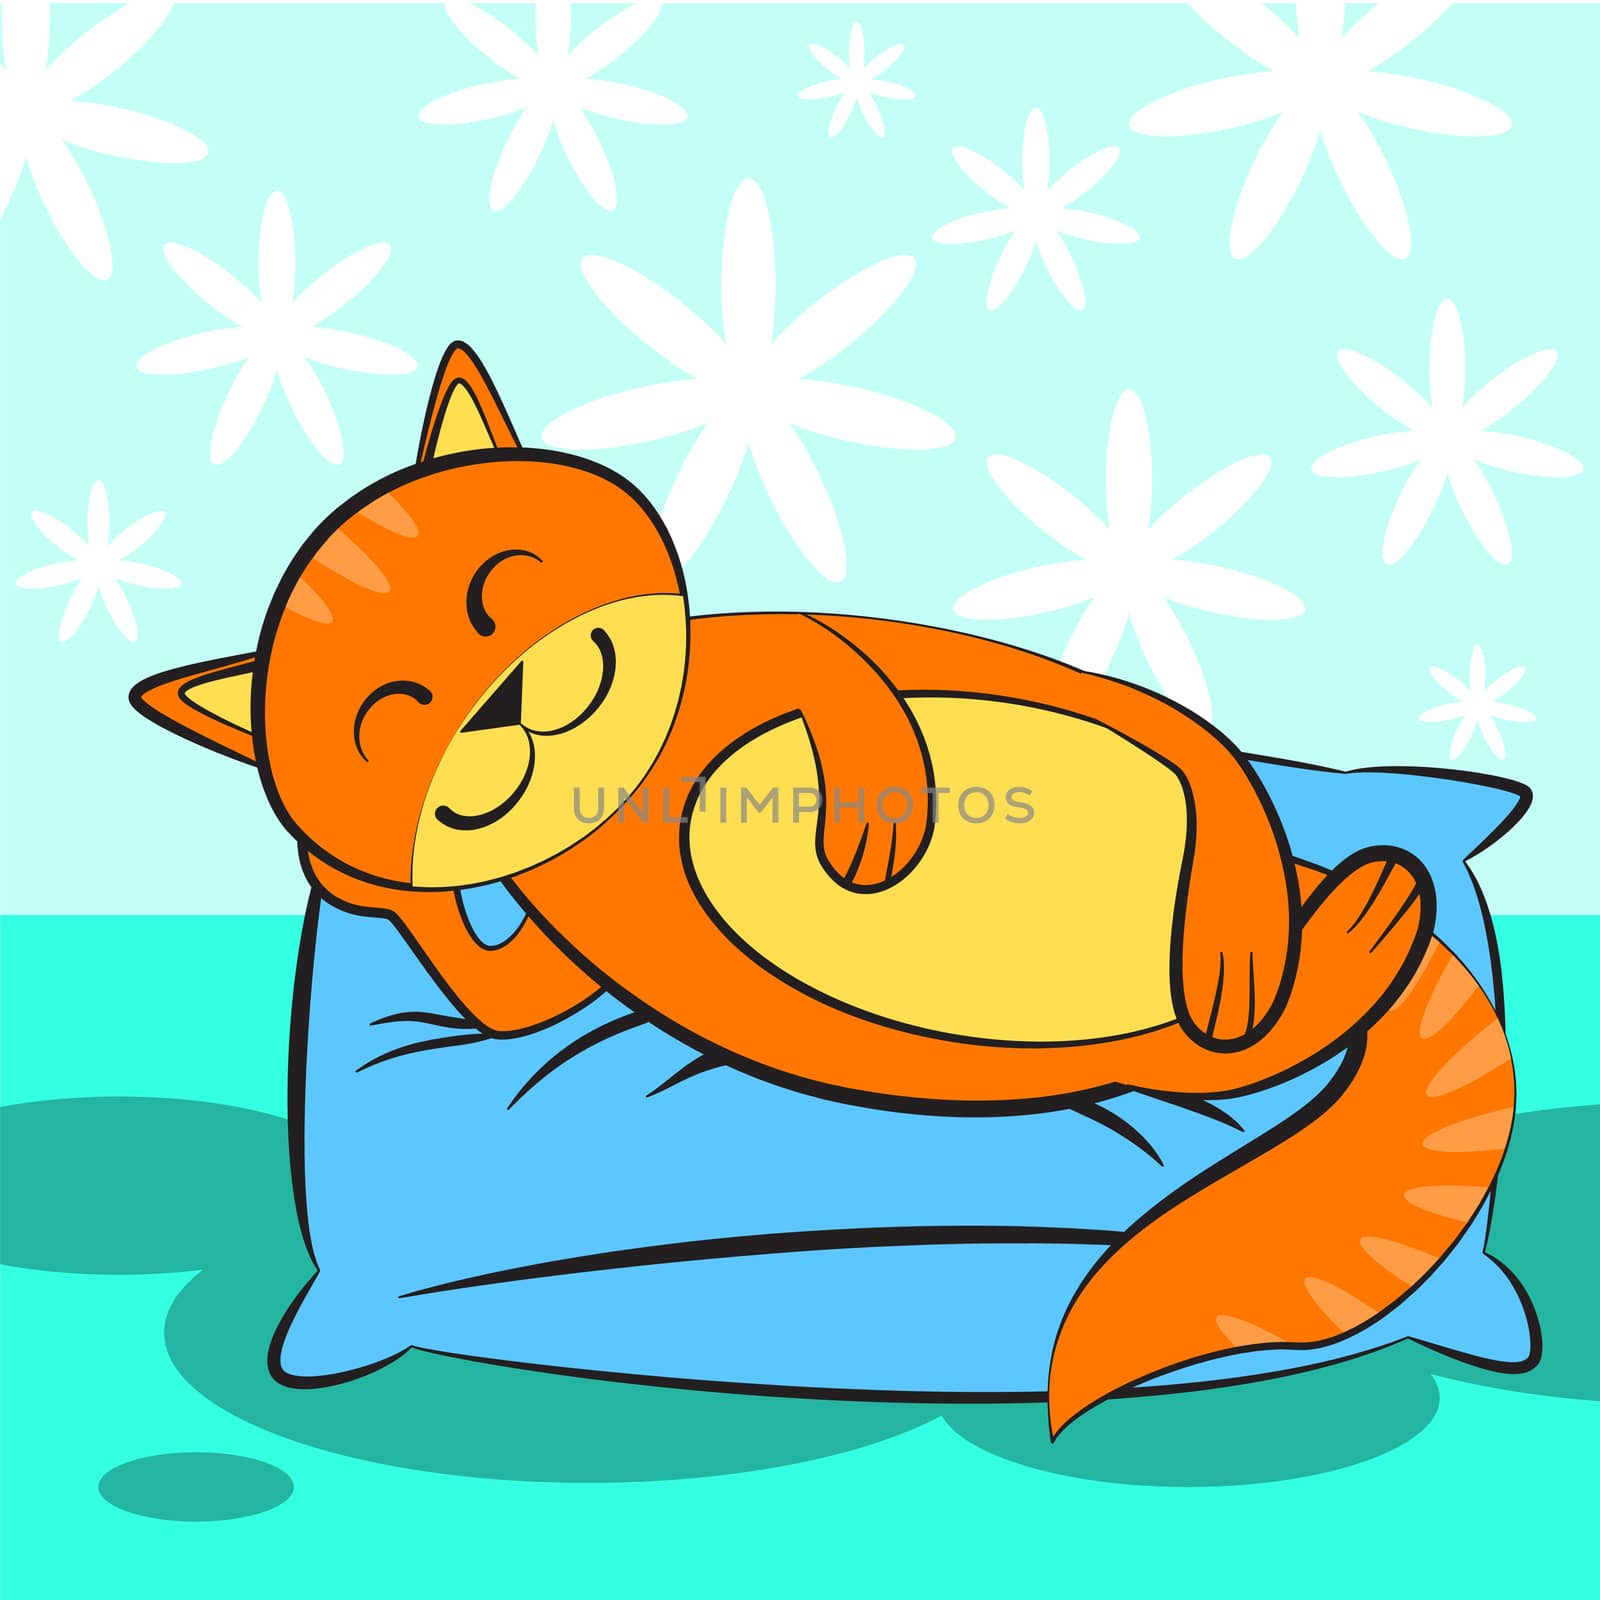 Cute orange cat sleeping on blue and a soft pillow. by Adamchuk